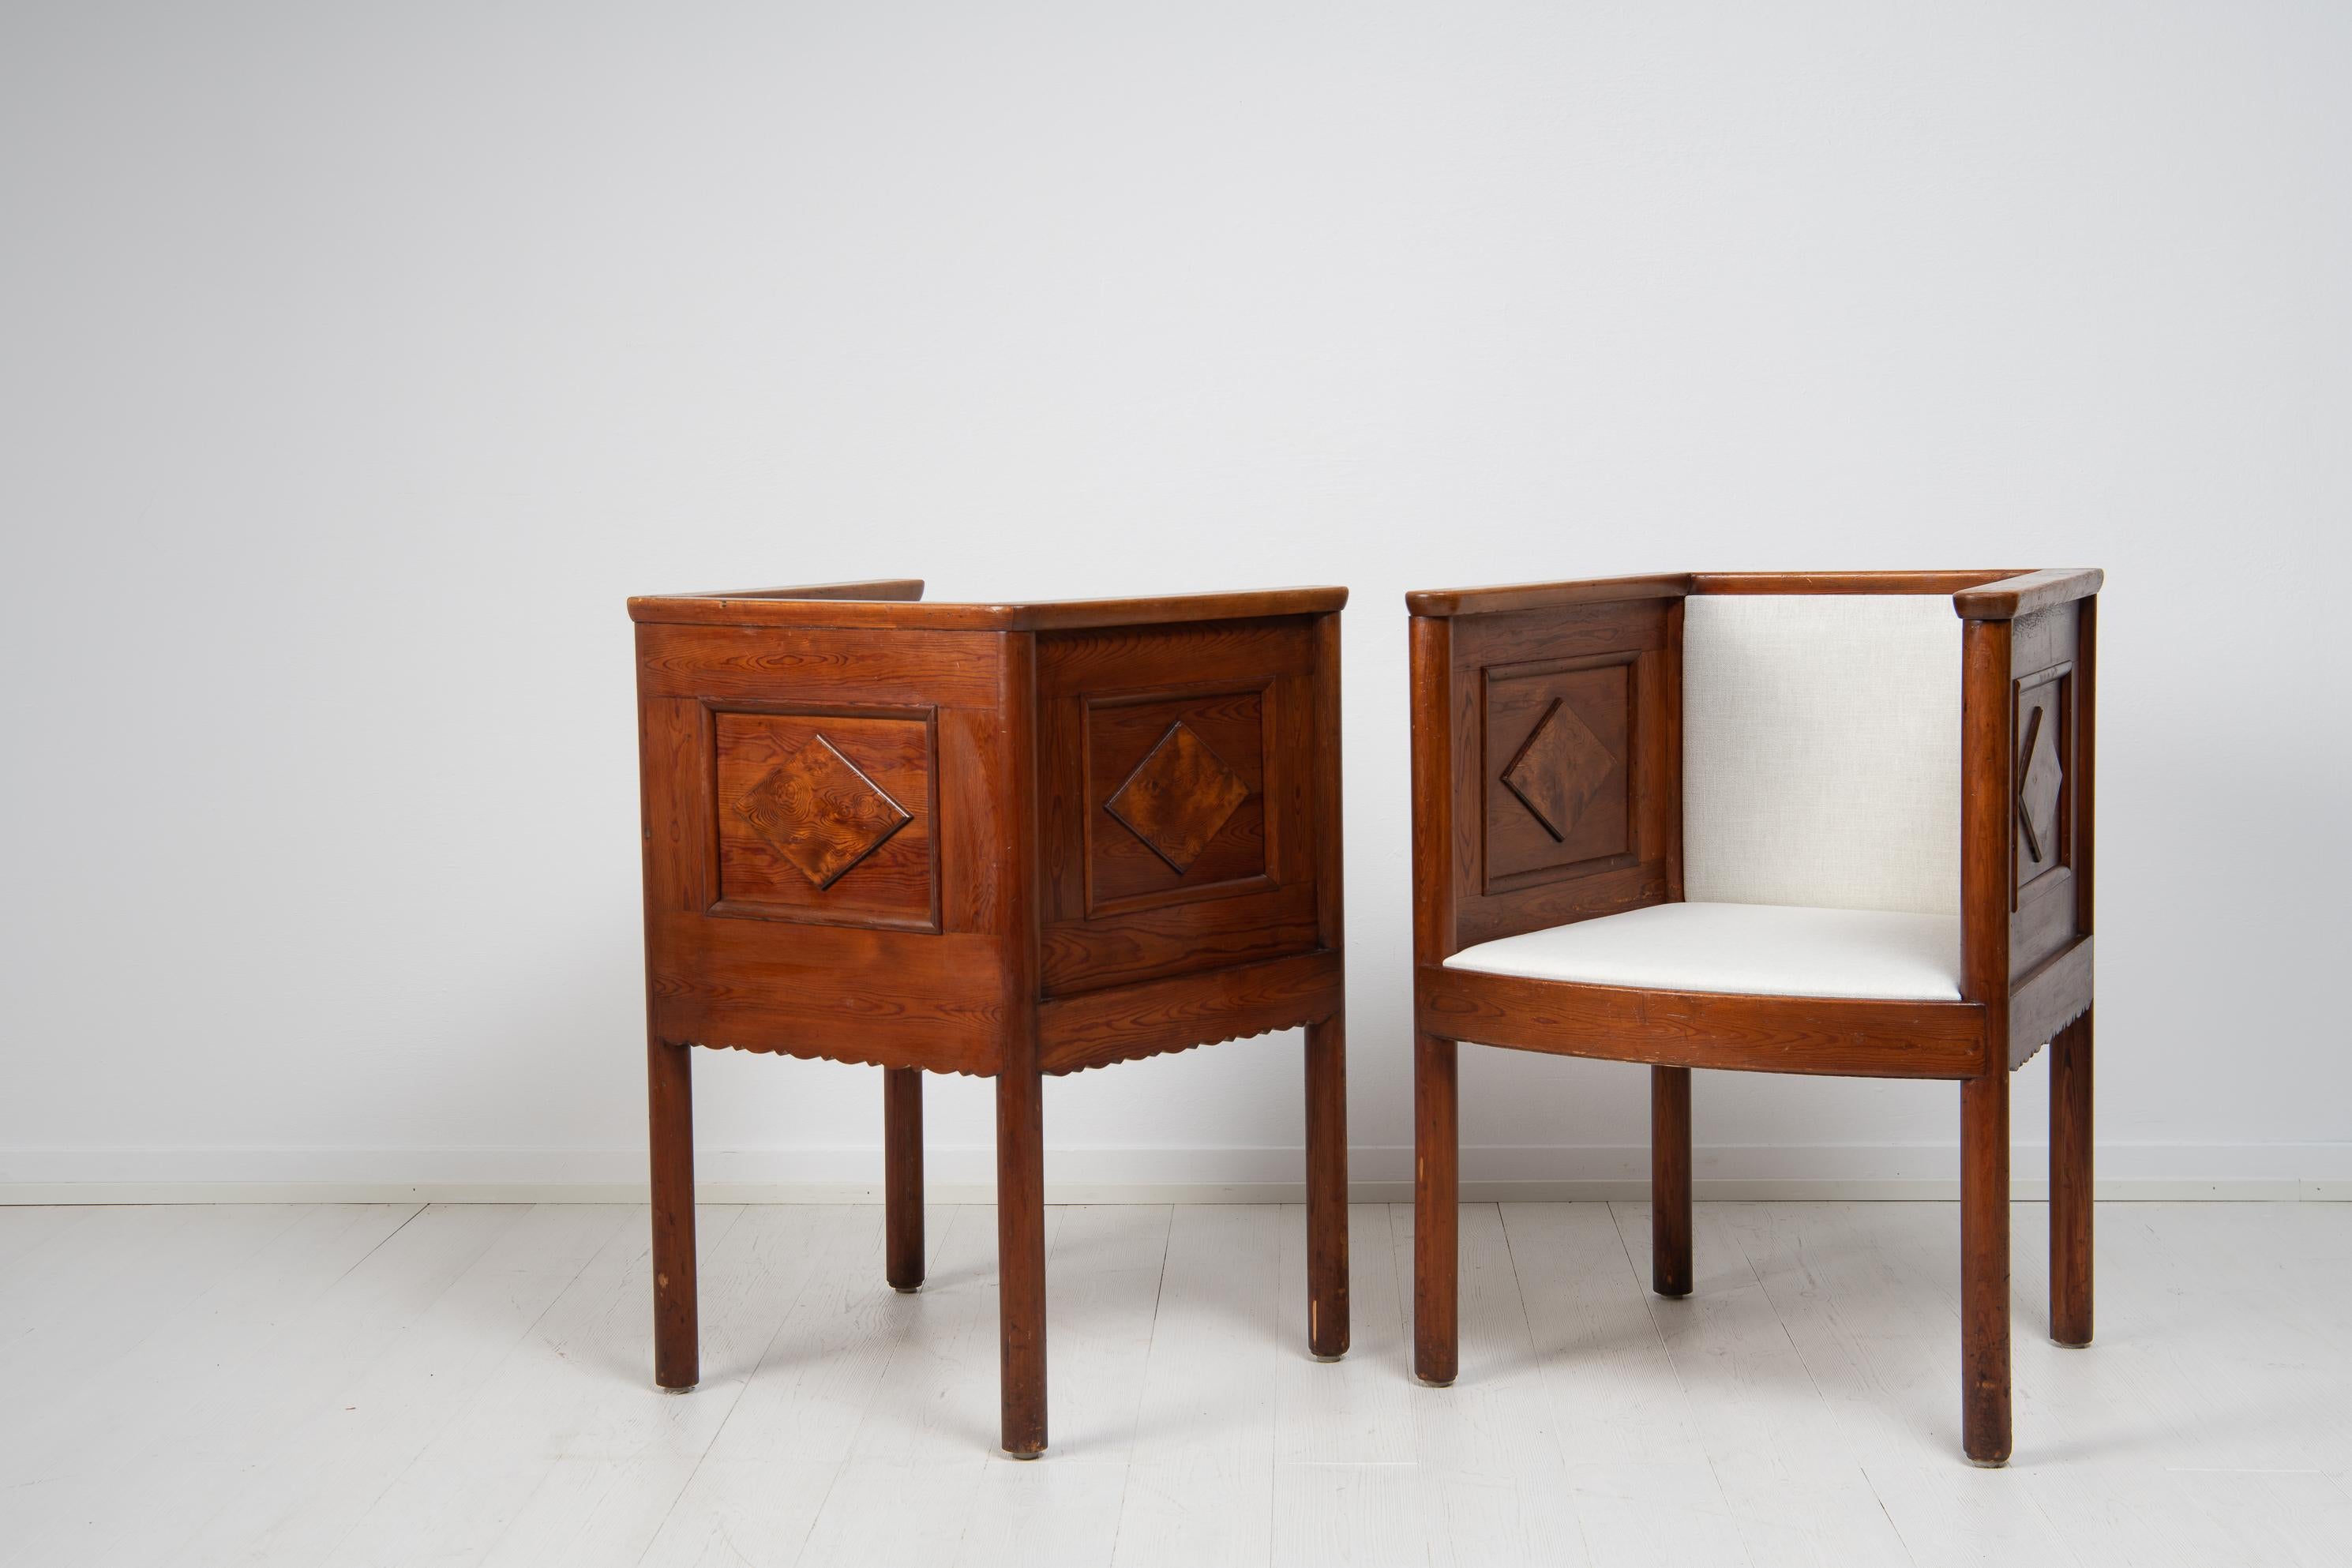 20th Century Pair of Armchairs in the Style of Axel Einar Hjorth